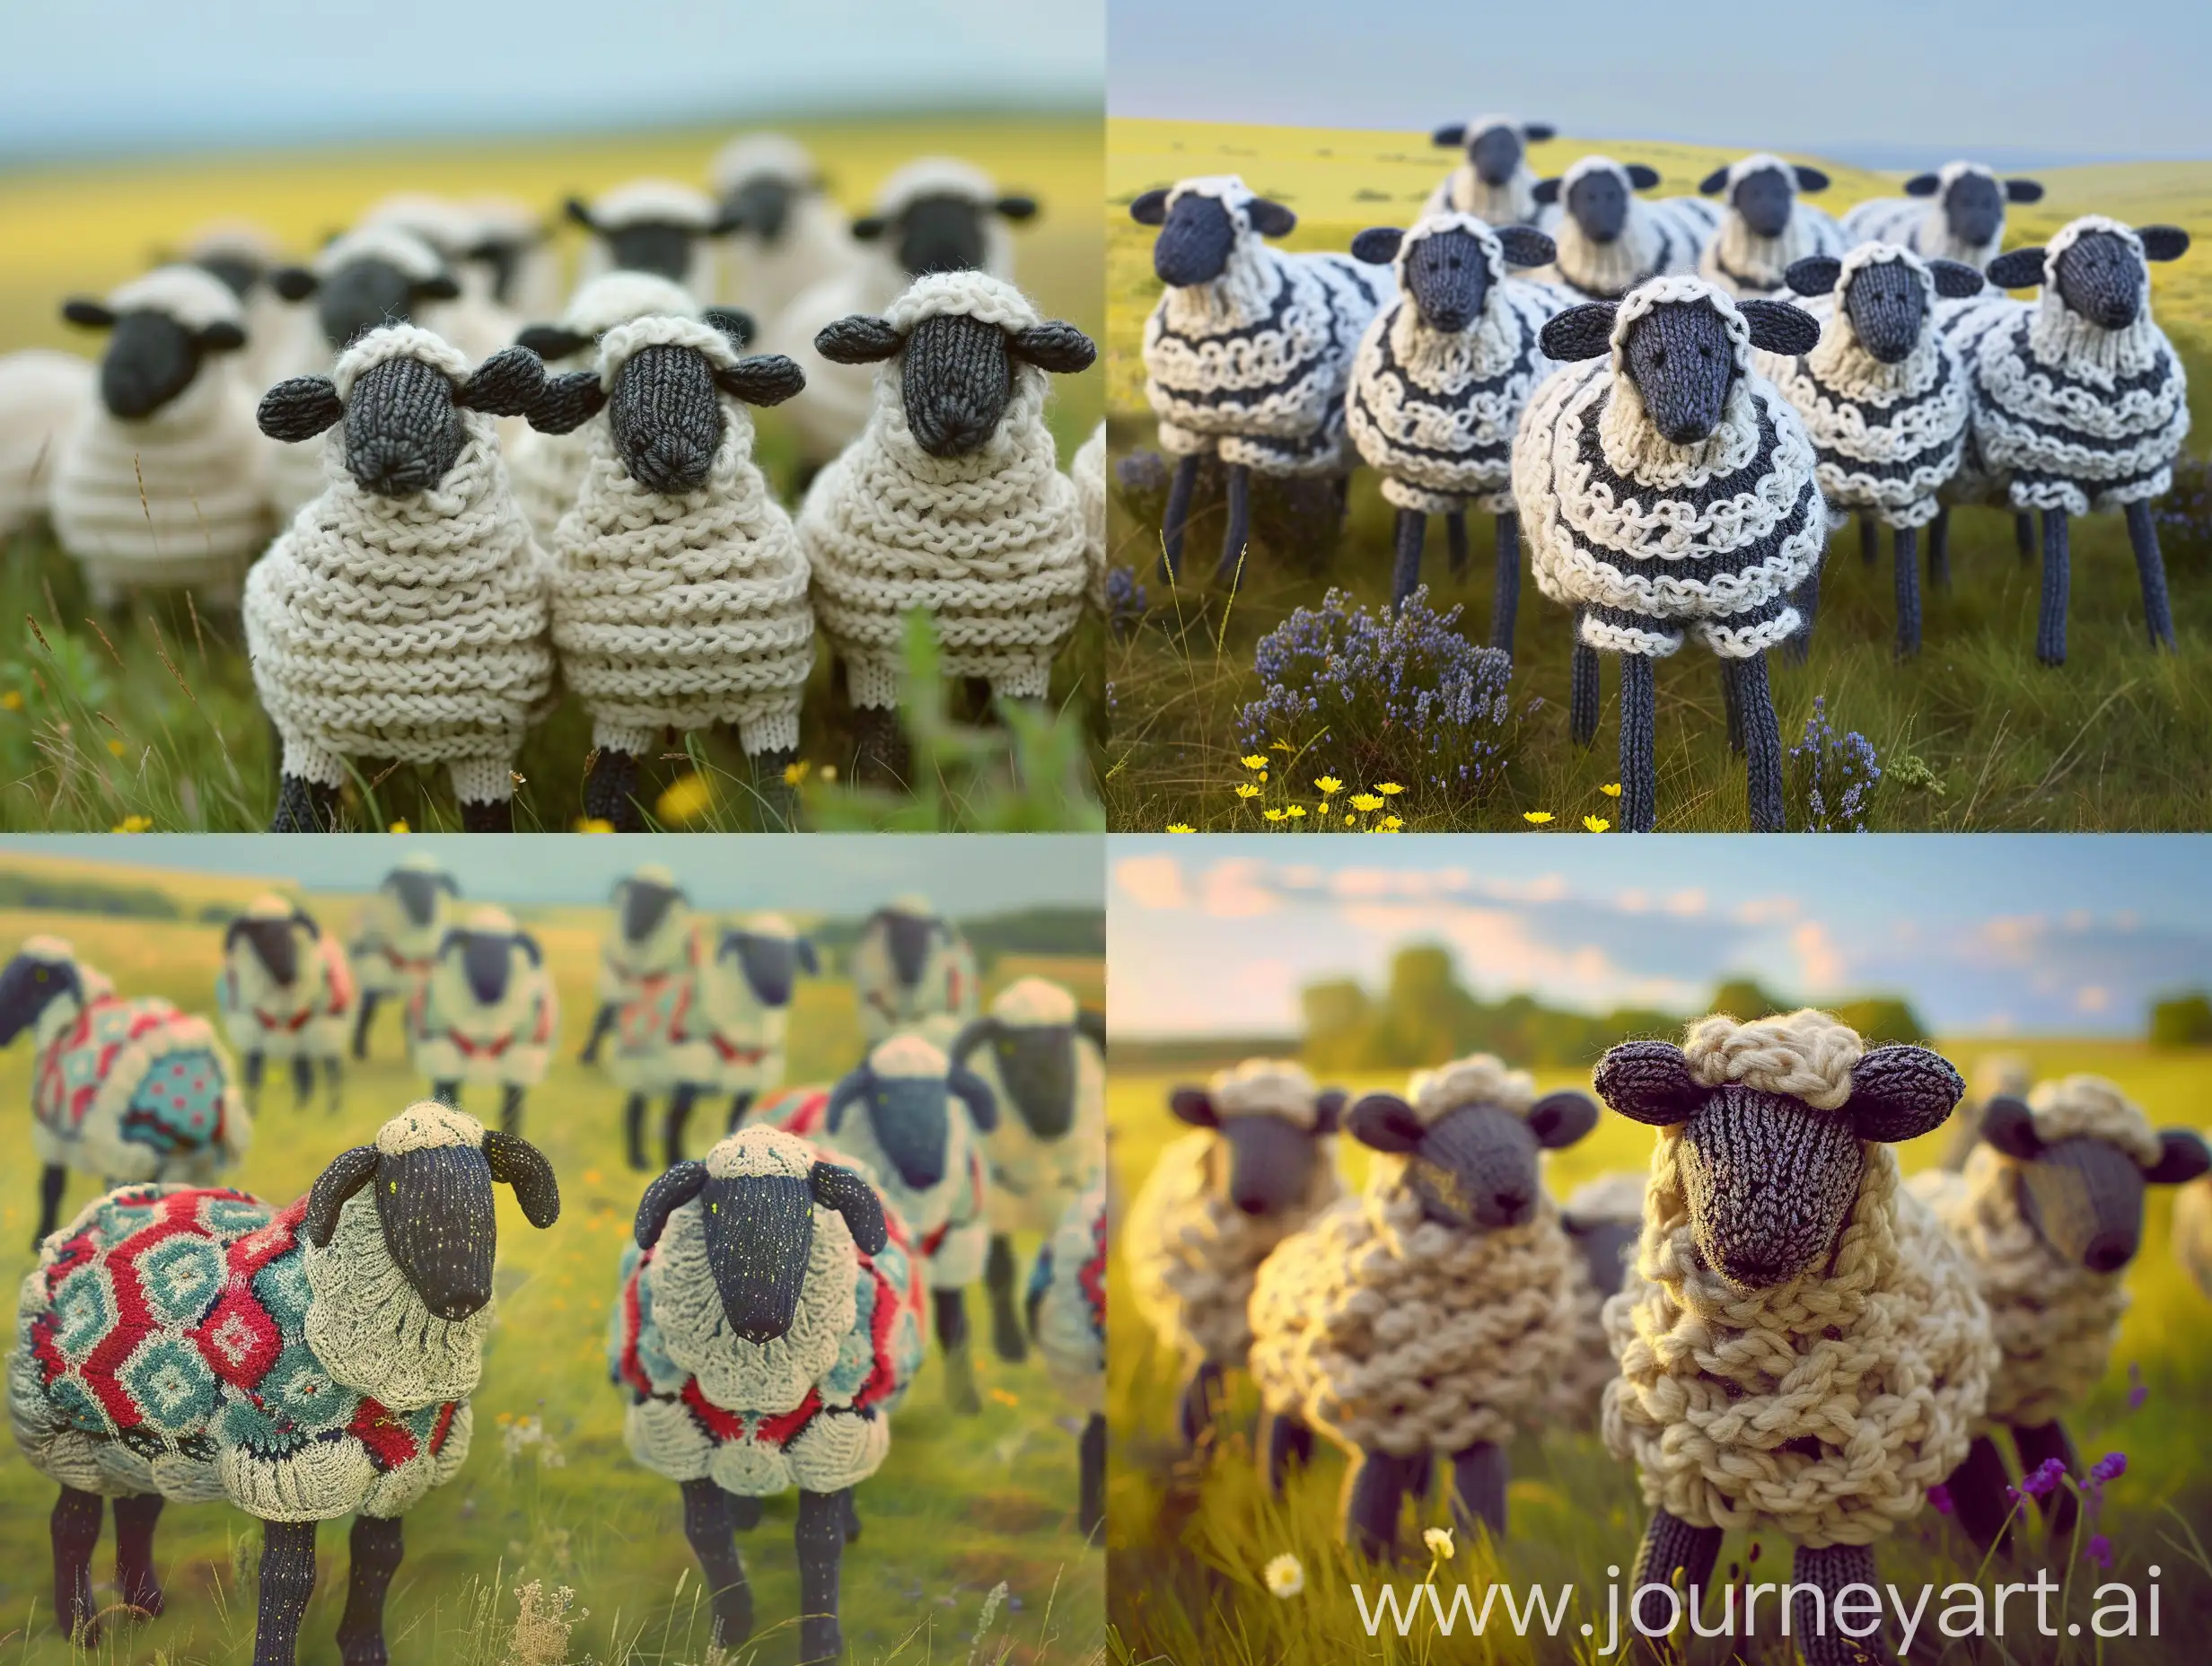 imagine flock of knitted sheep in graphic design on a field background, in 1920×1080 format